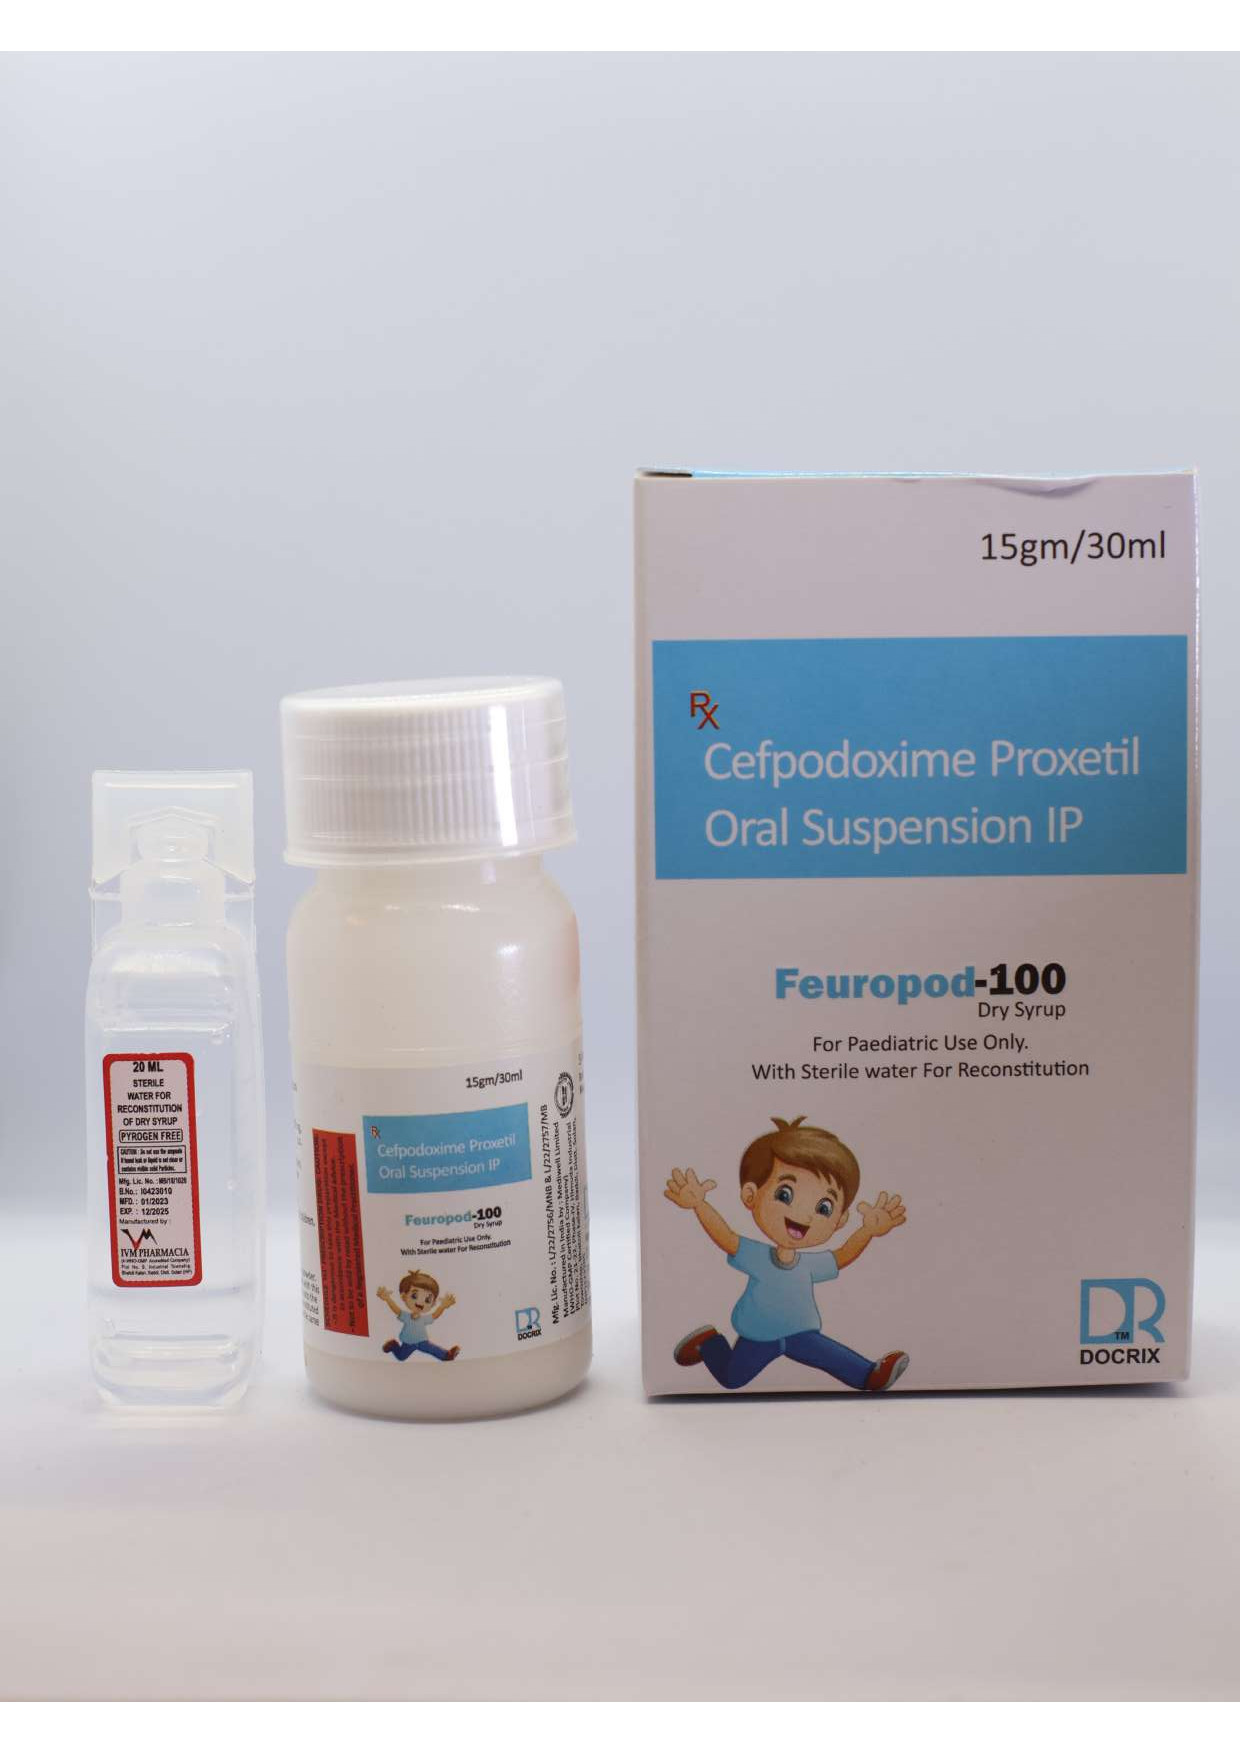 Product Name: Feuropod 100, Compositions of Feuropod 100 are Cefpodoxime Proxetil Oral Suspension IP - Docrix Healthcare